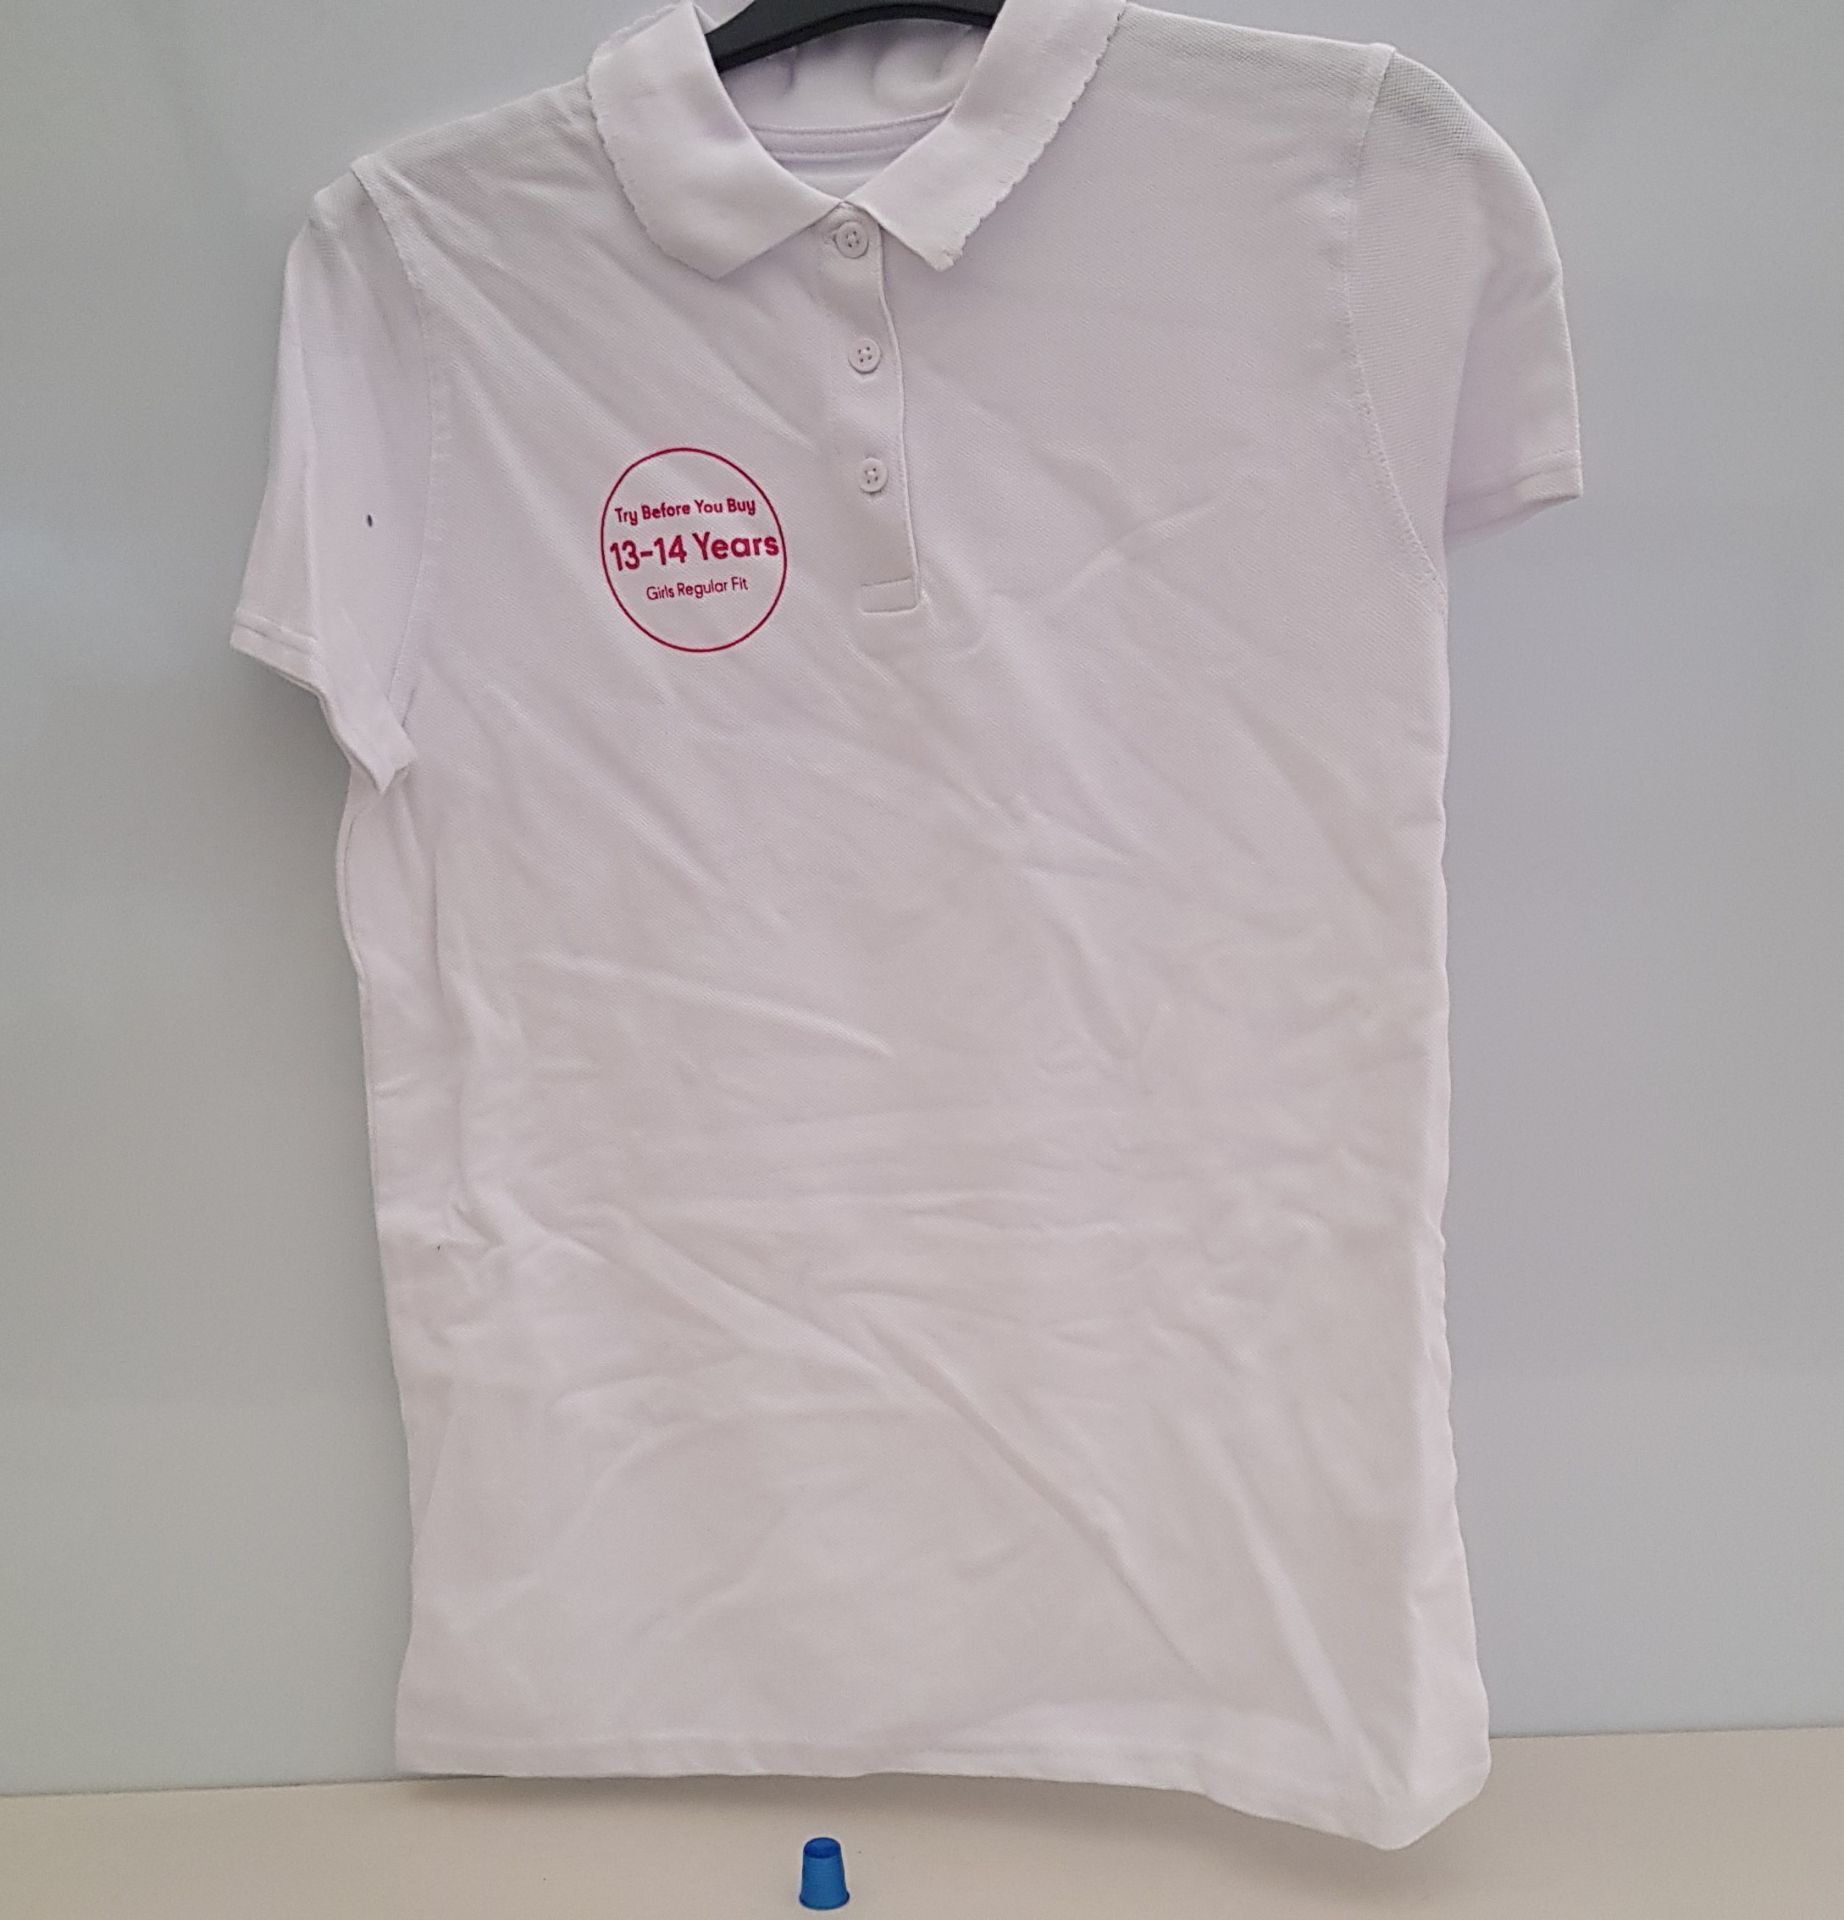 APPROX 200 X BRAND NEW F&F GIRLS KIDS SCHOOL WHITE POLO SHIRTS (EMBOSSED TRY BEFORE YOU BUY) SIZE